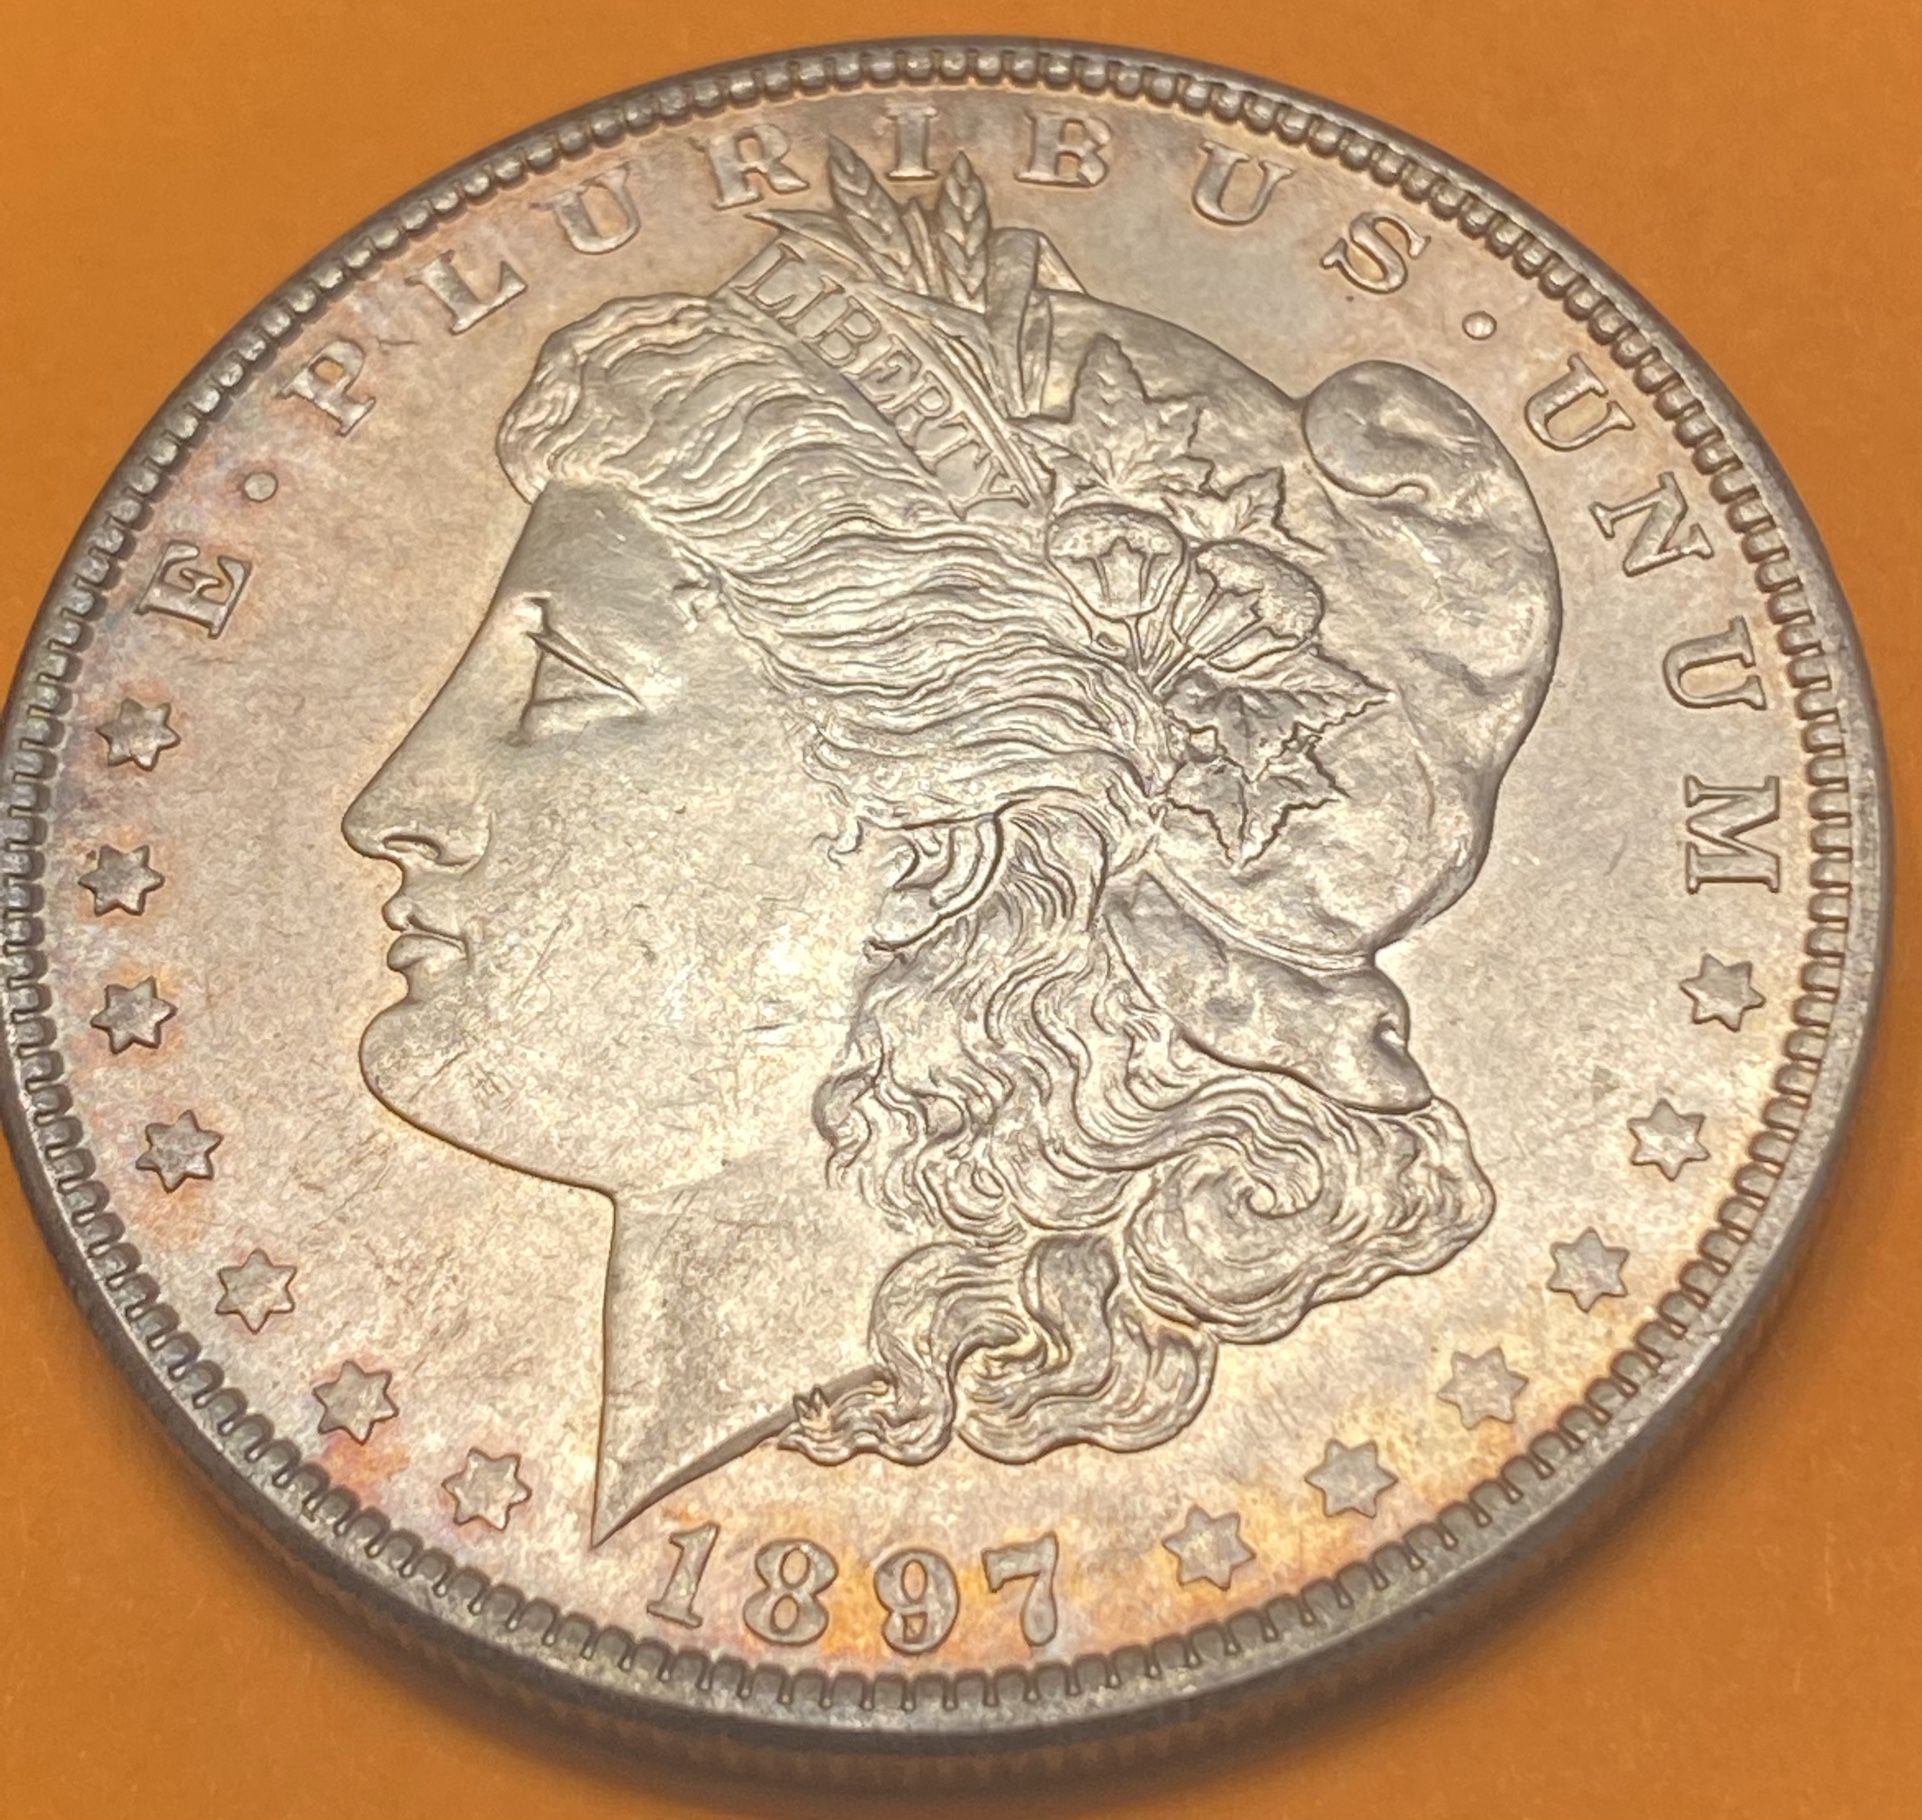 1897-O MINT STATE TAKING REASONABLE OFFERS